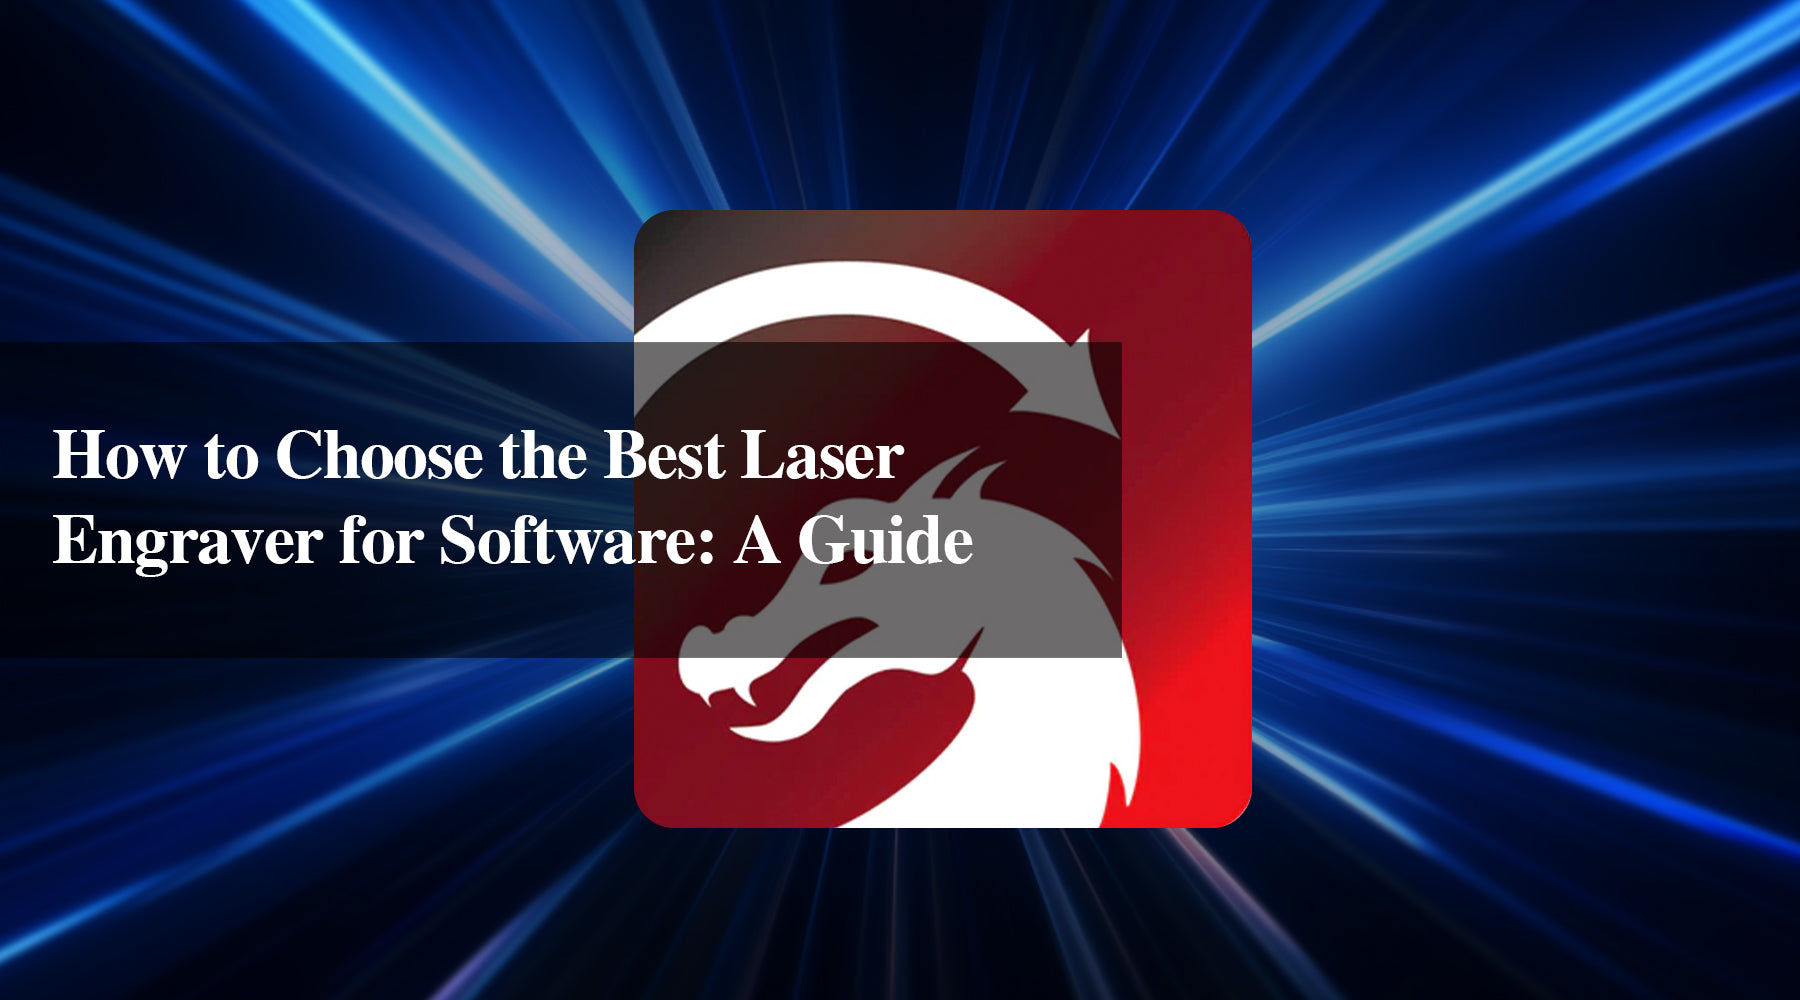 How to Choose the Best Laser Engraver for Software: A Guide